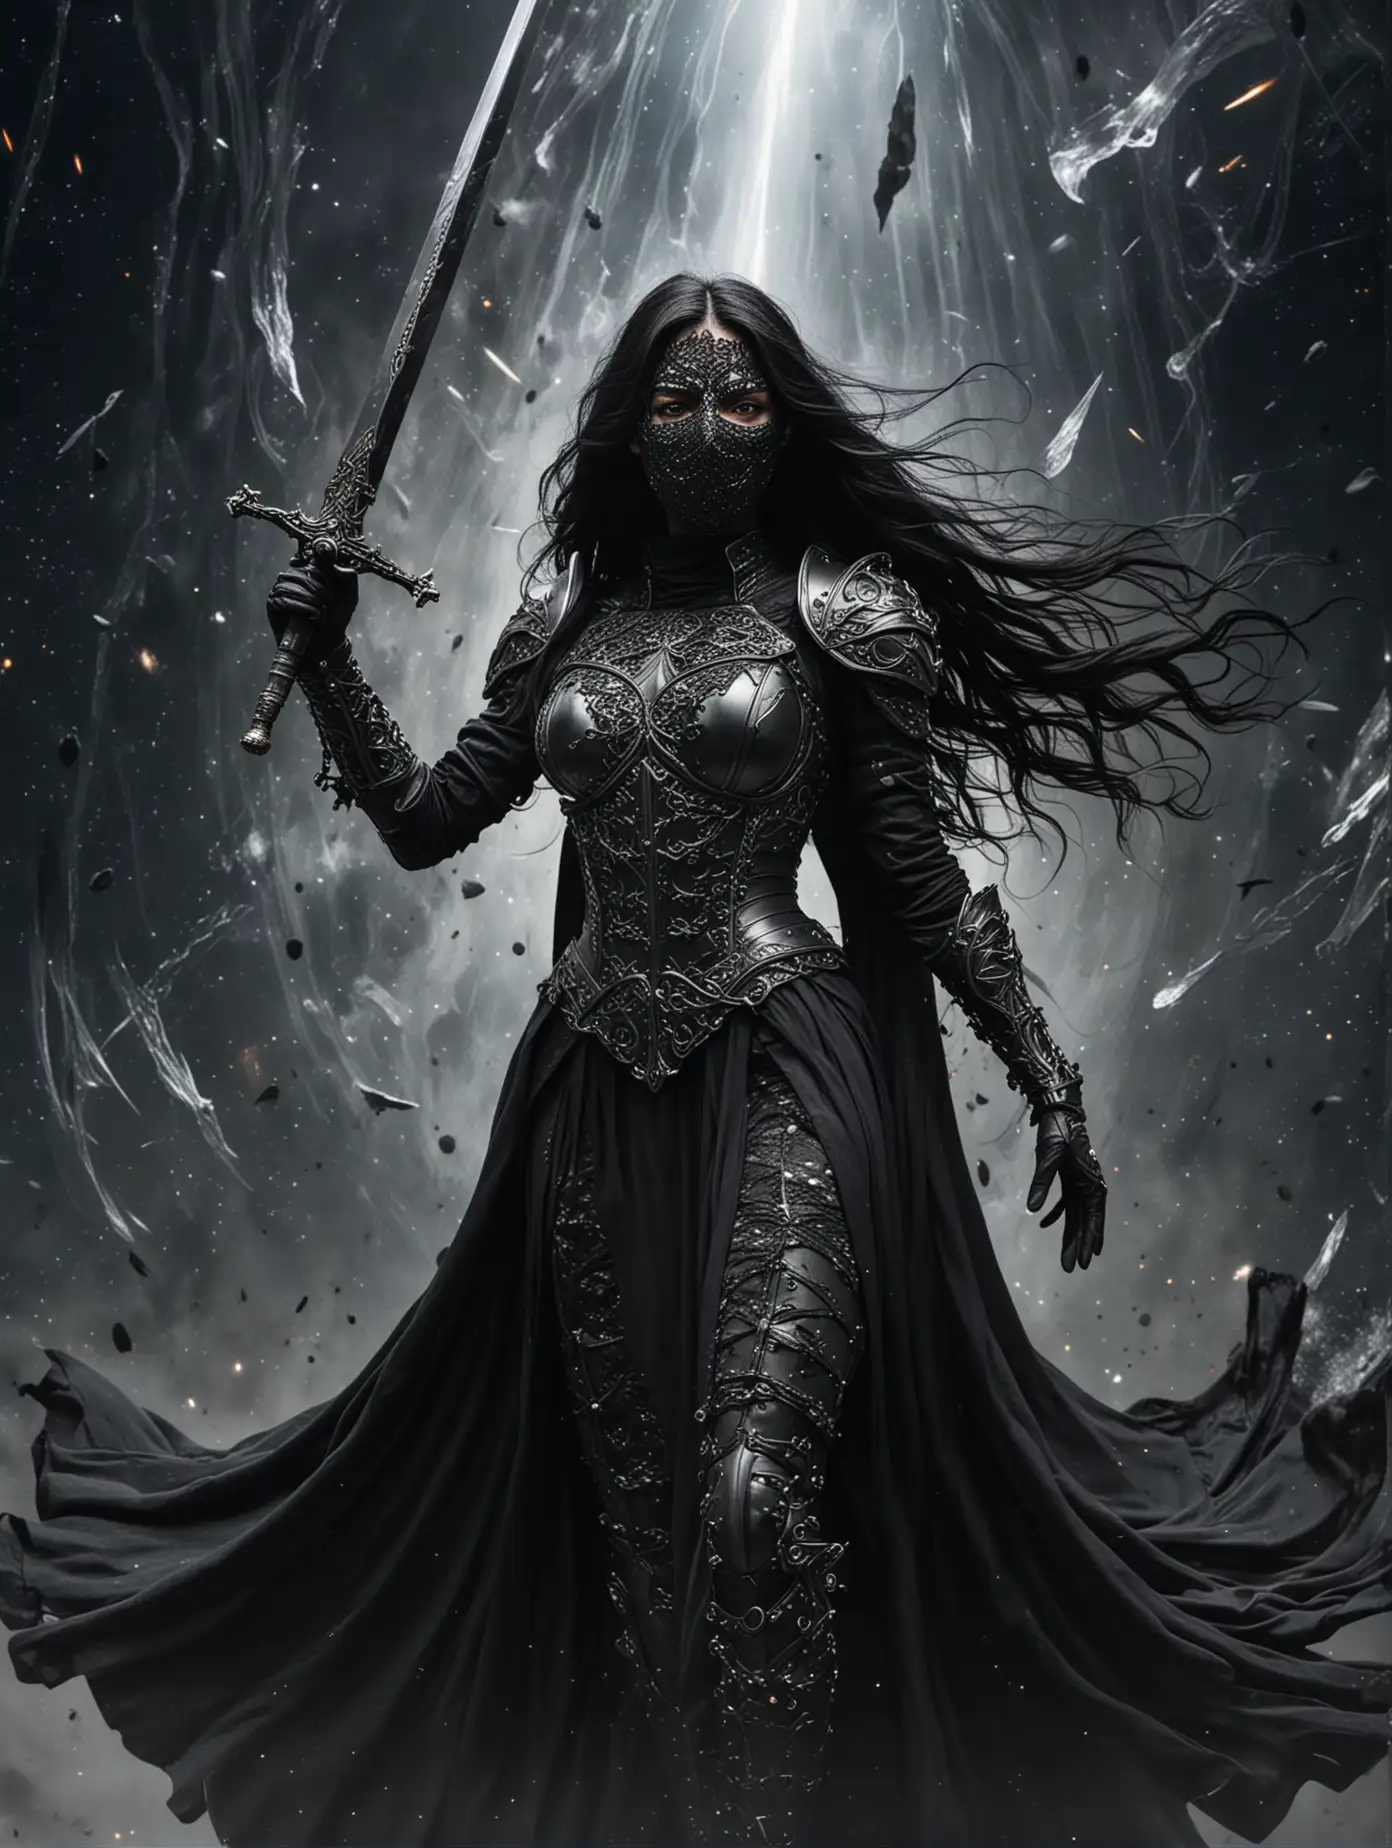 Warrior-Woman-with-Flowing-Black-Hair-and-Mask-Guards-Black-Hole